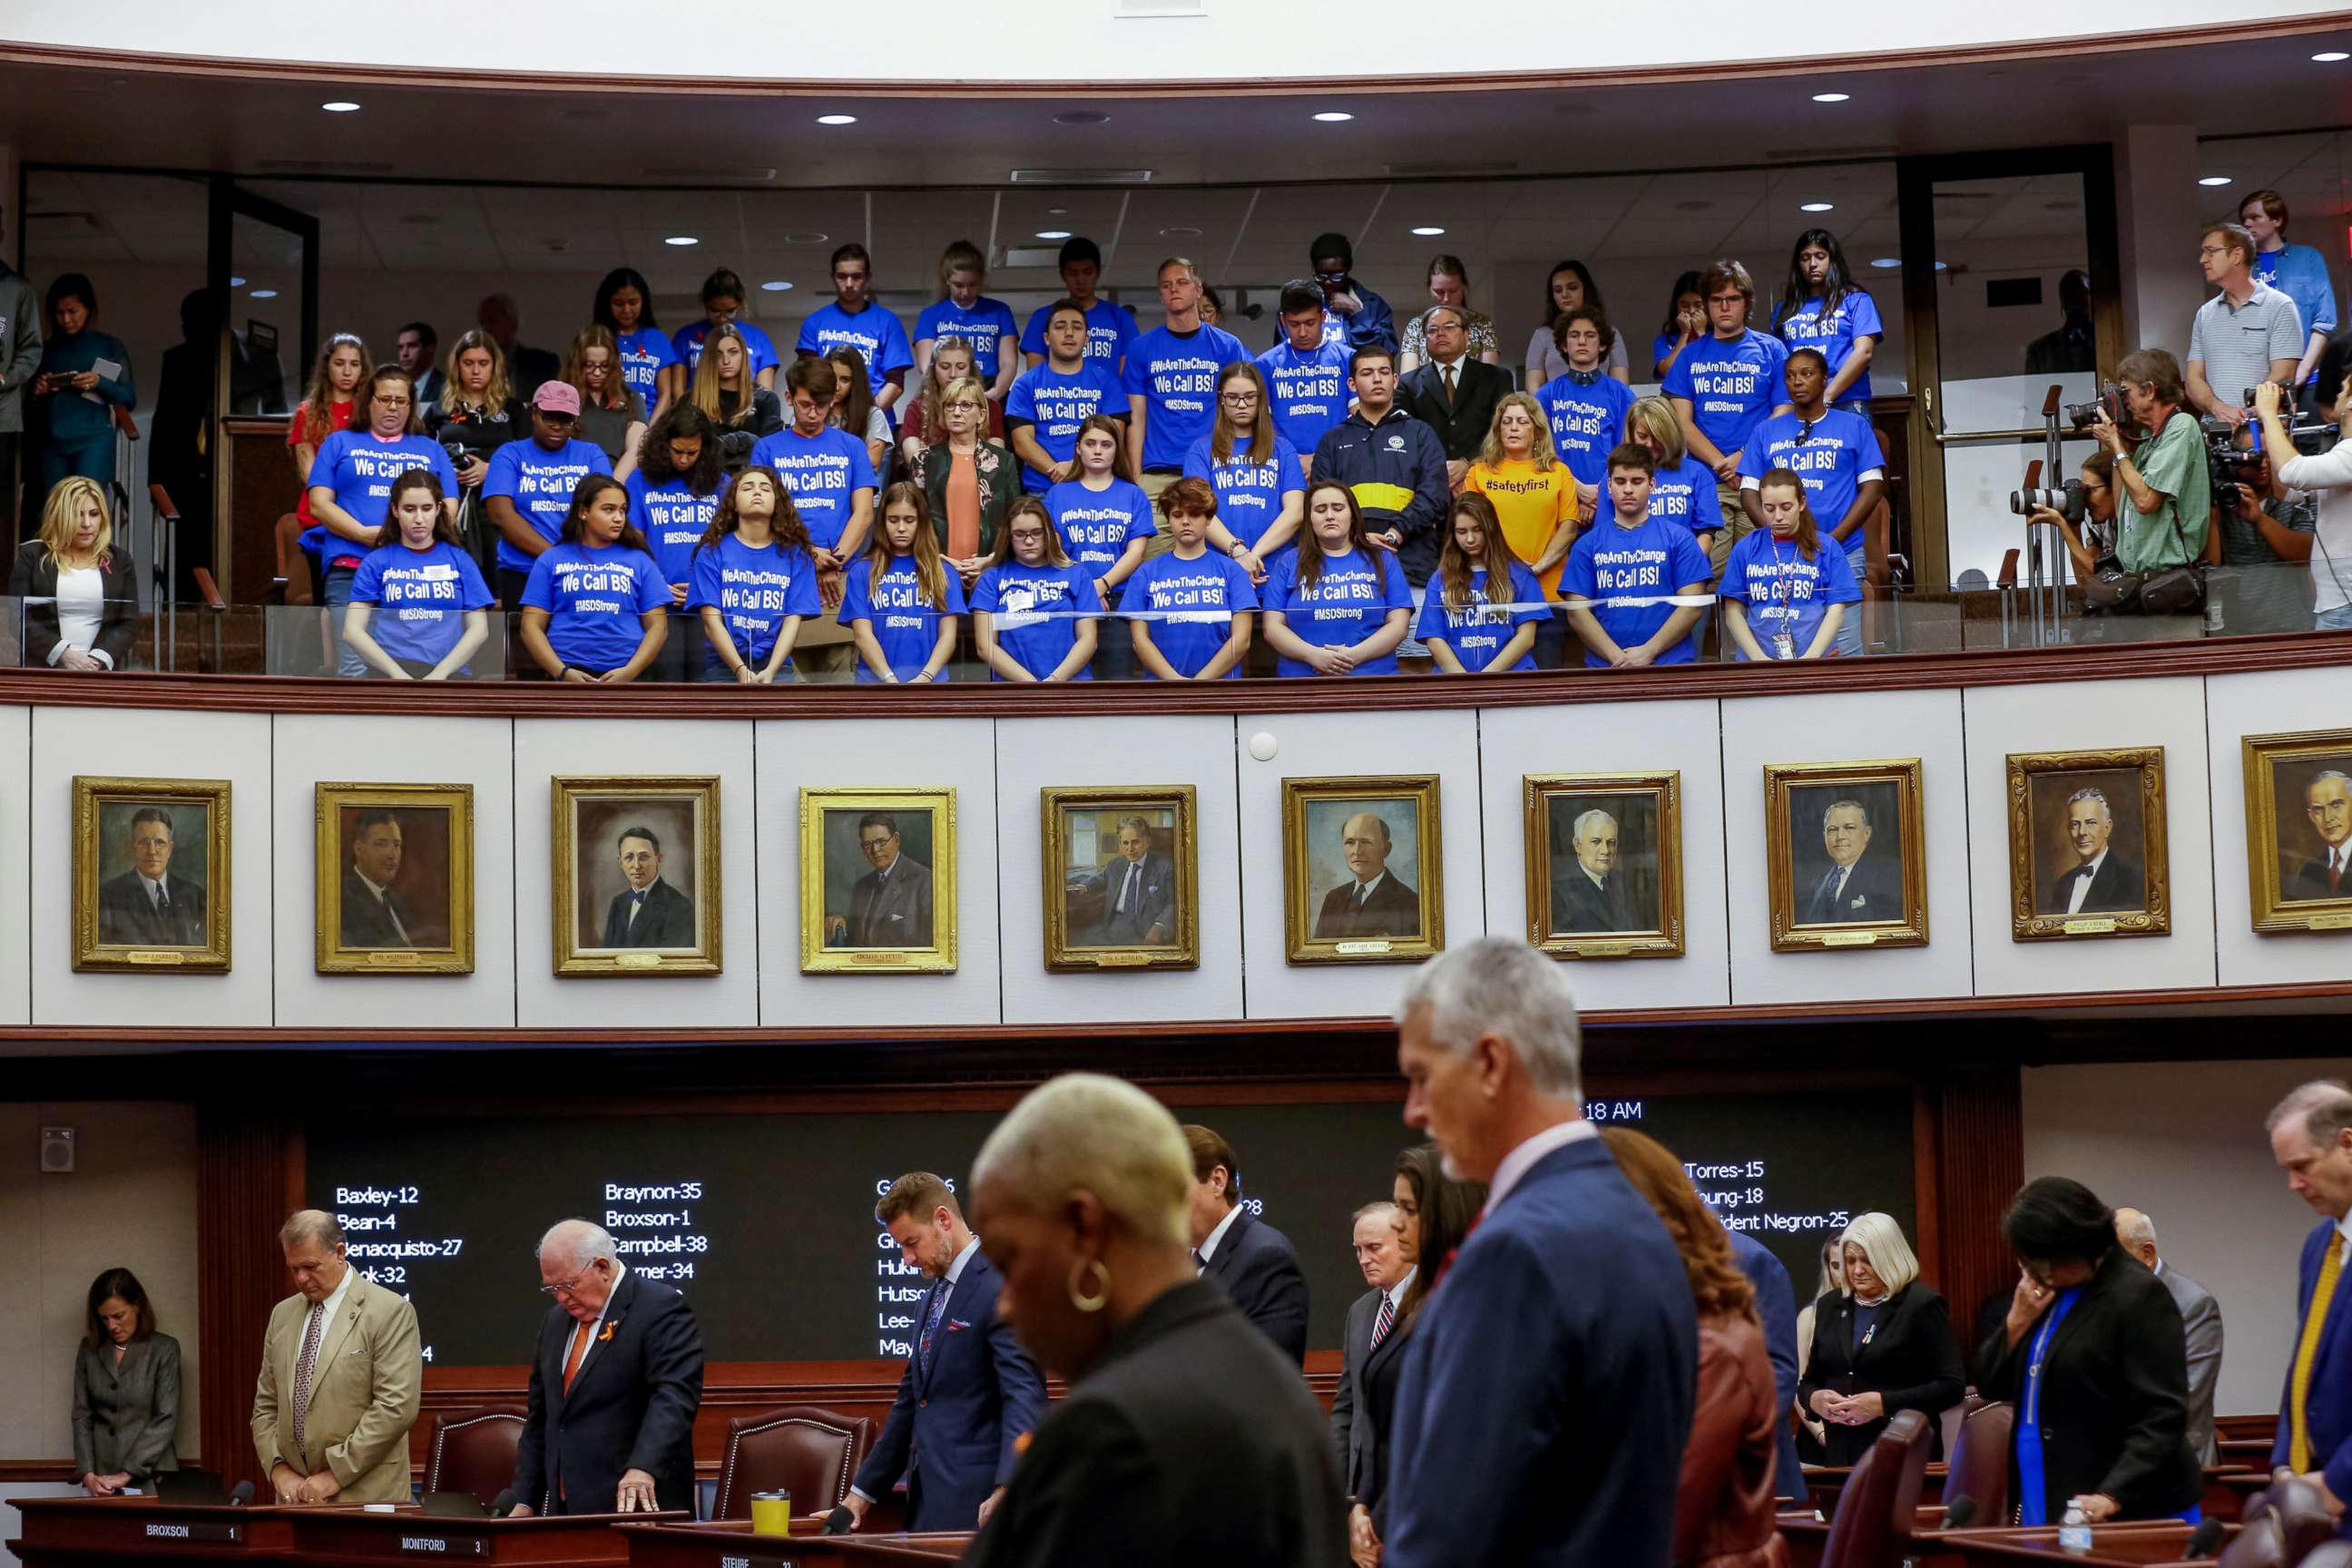 PHOTO: Students and their chaperones from Marjory Stoneman Douglas High School, wearing blue t-shirts, stand in the gallery above the Florida Senate as it held a moment of silence in honor of the victims of the mass shooting, February 21, 2018.